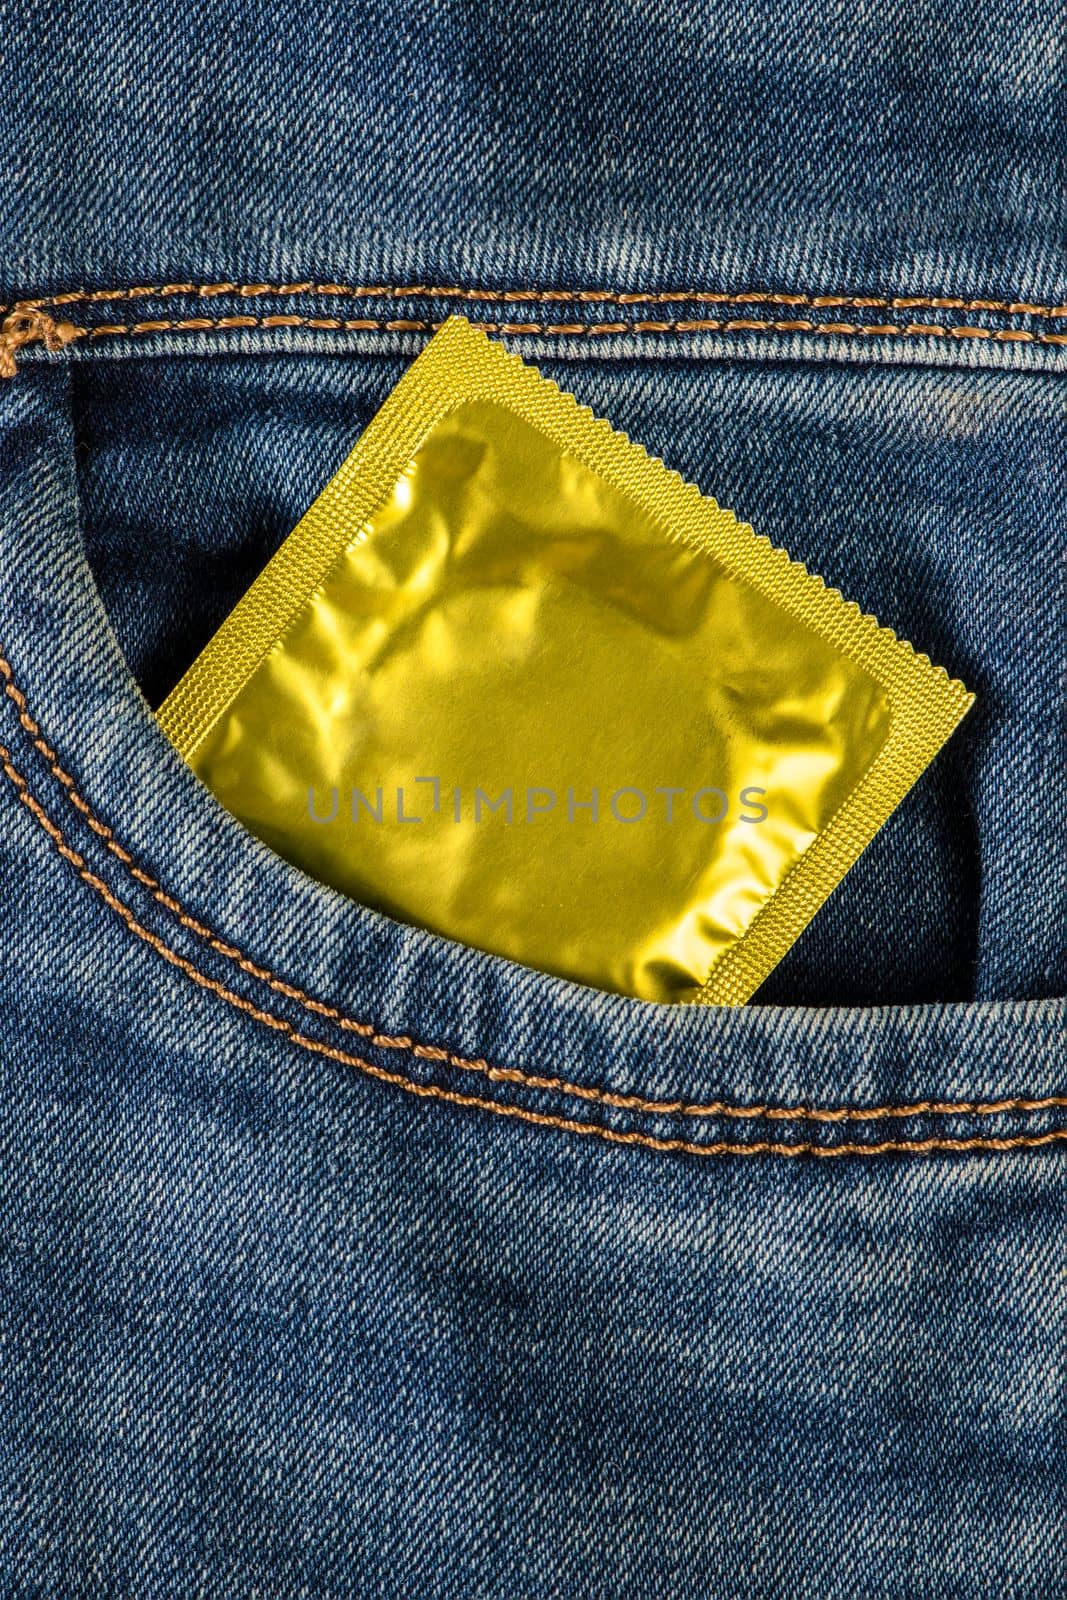 Safe sex, protection from unwanted pregnancy. Protection against sexual diseases, condoms in the pocket of blue jeans